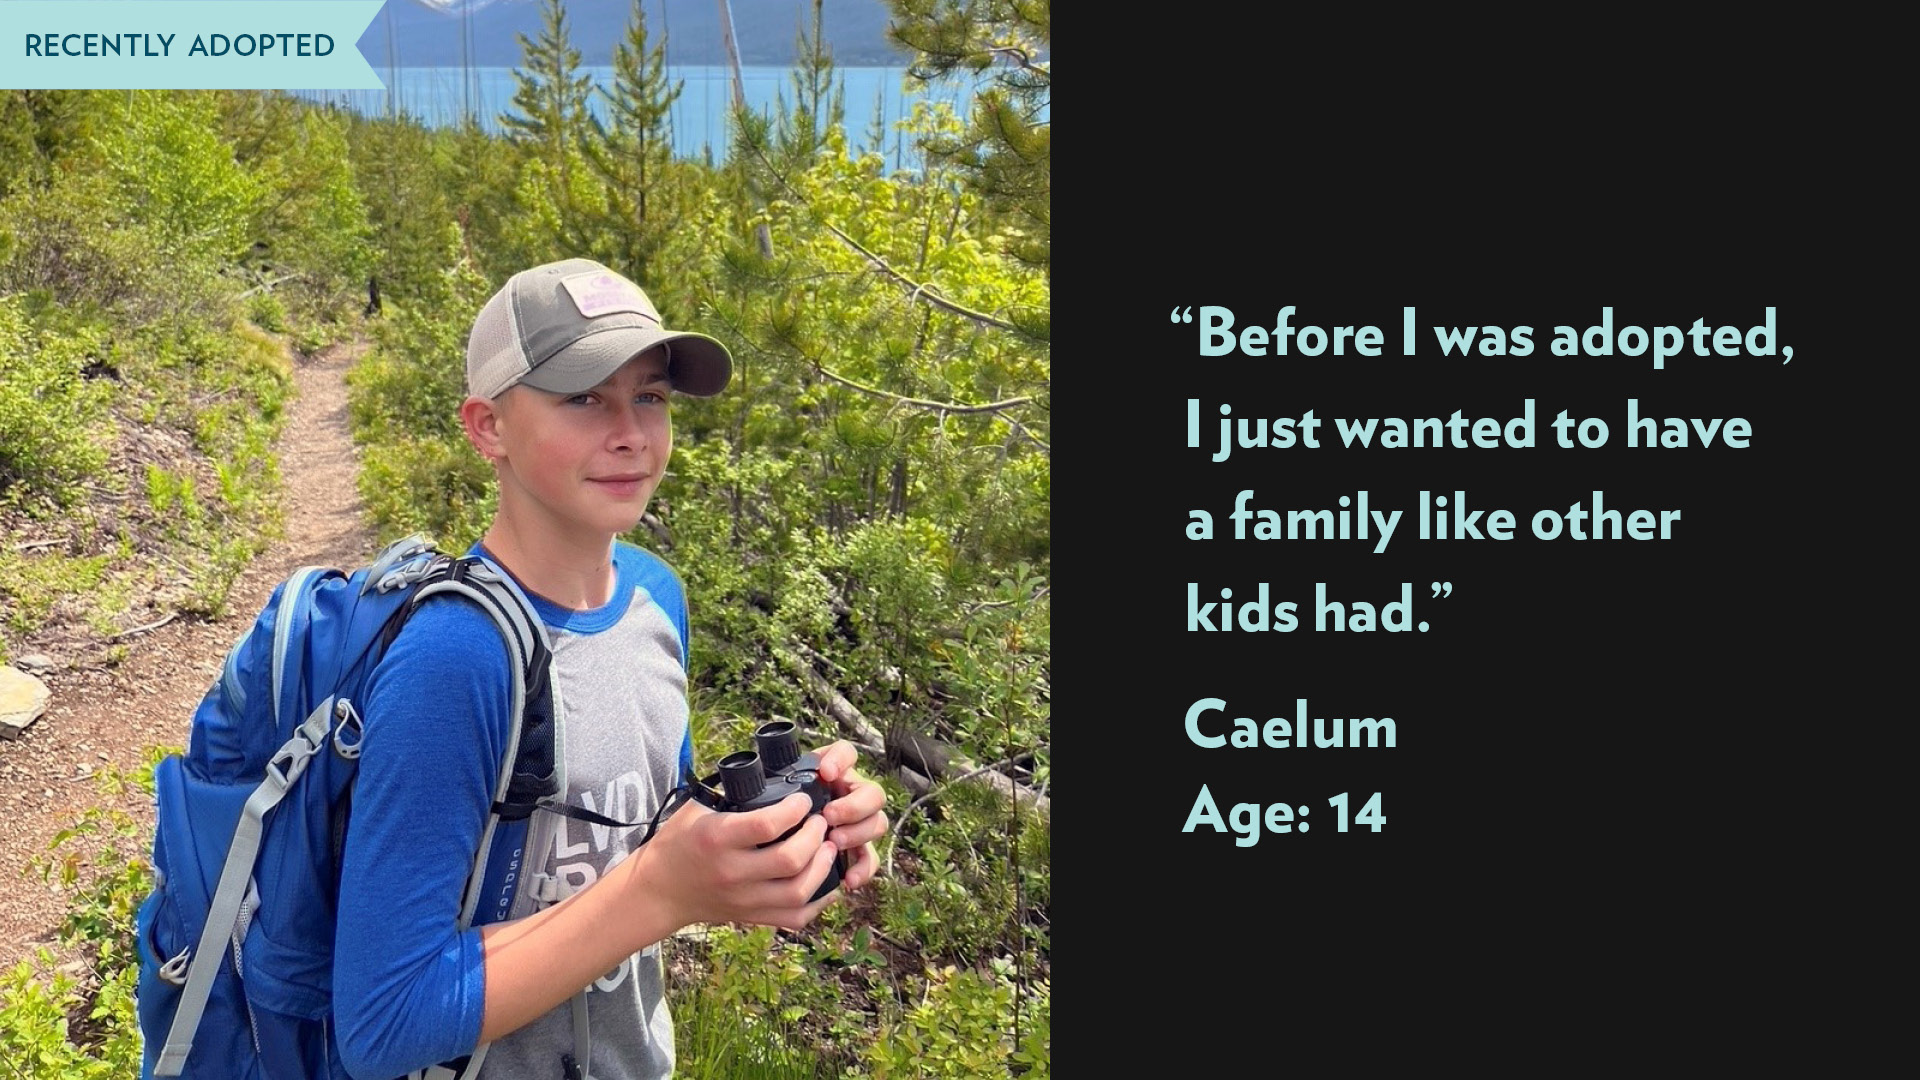 Before I was adopted, I just wanted to have a family like other kids had. Caelum, age 14. Recently adopted.